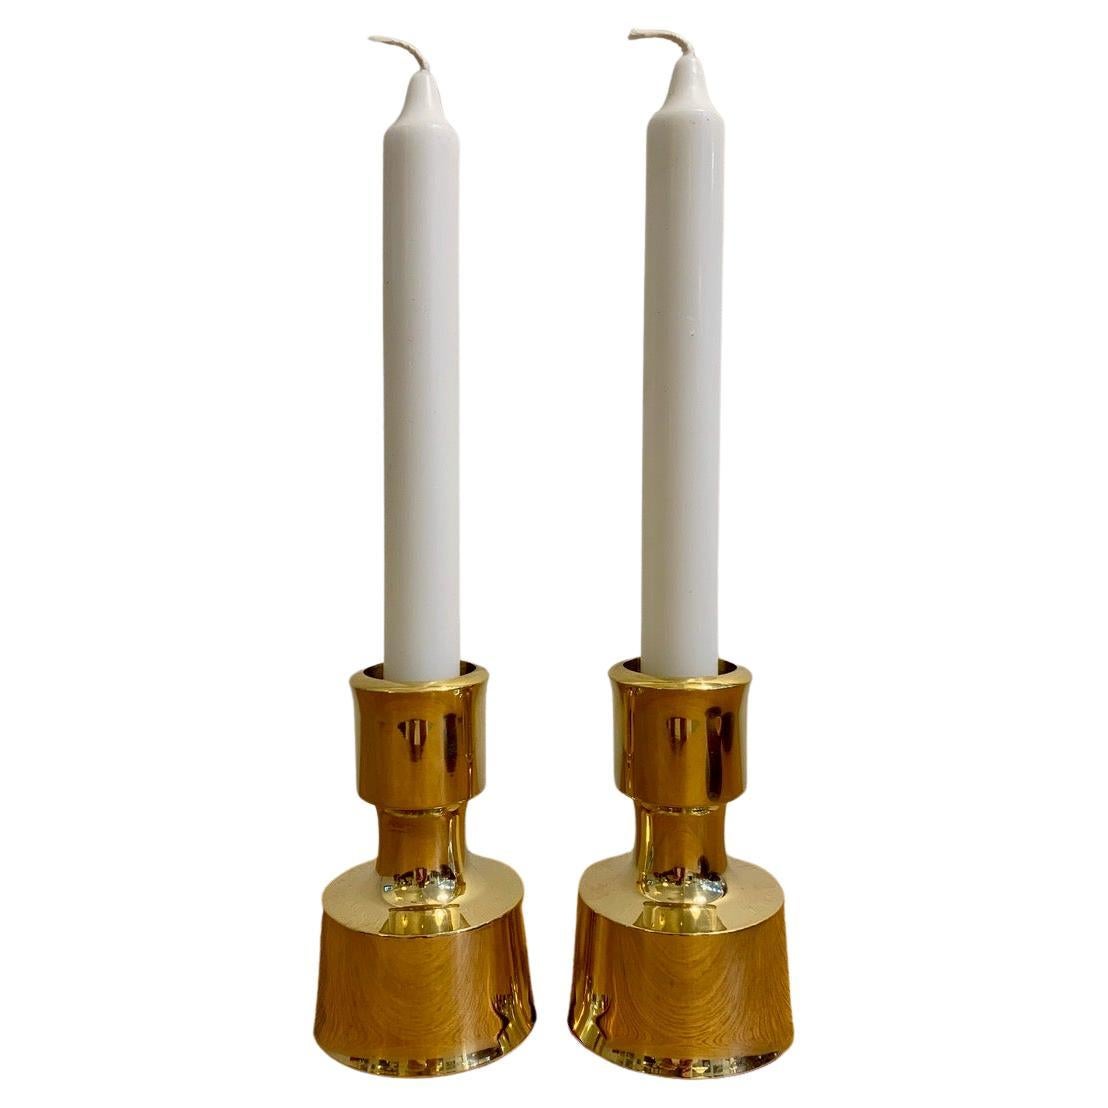 Pair of Solid Brass Candle Holders by Jens H. Quistgaard for Dansk Designs 1963 For Sale